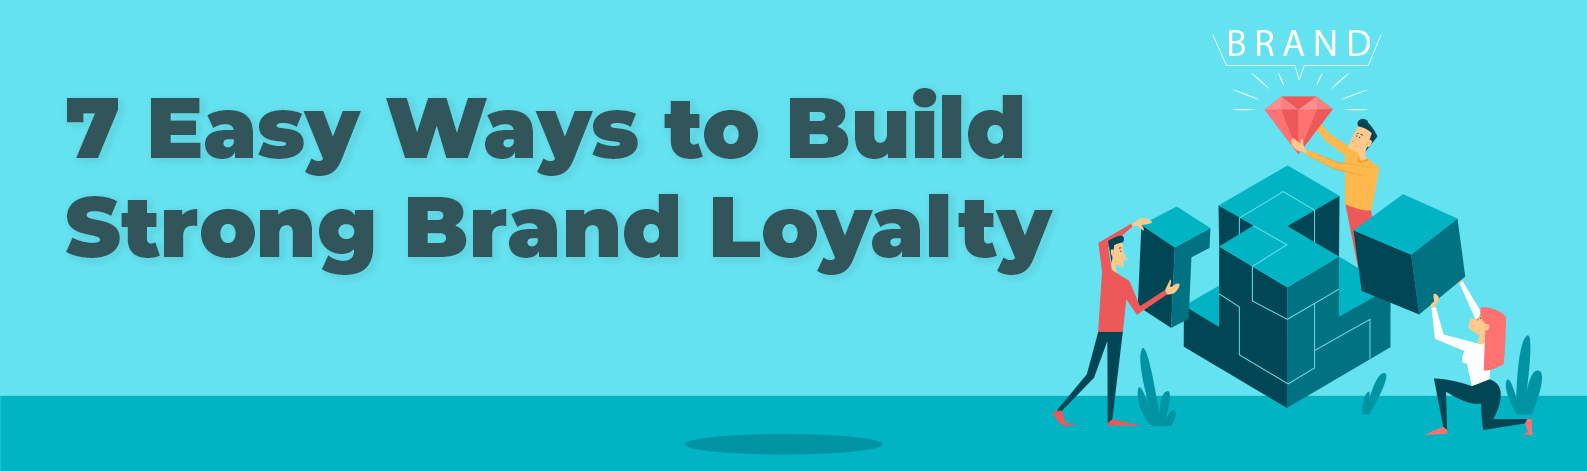 how to build brand royalty